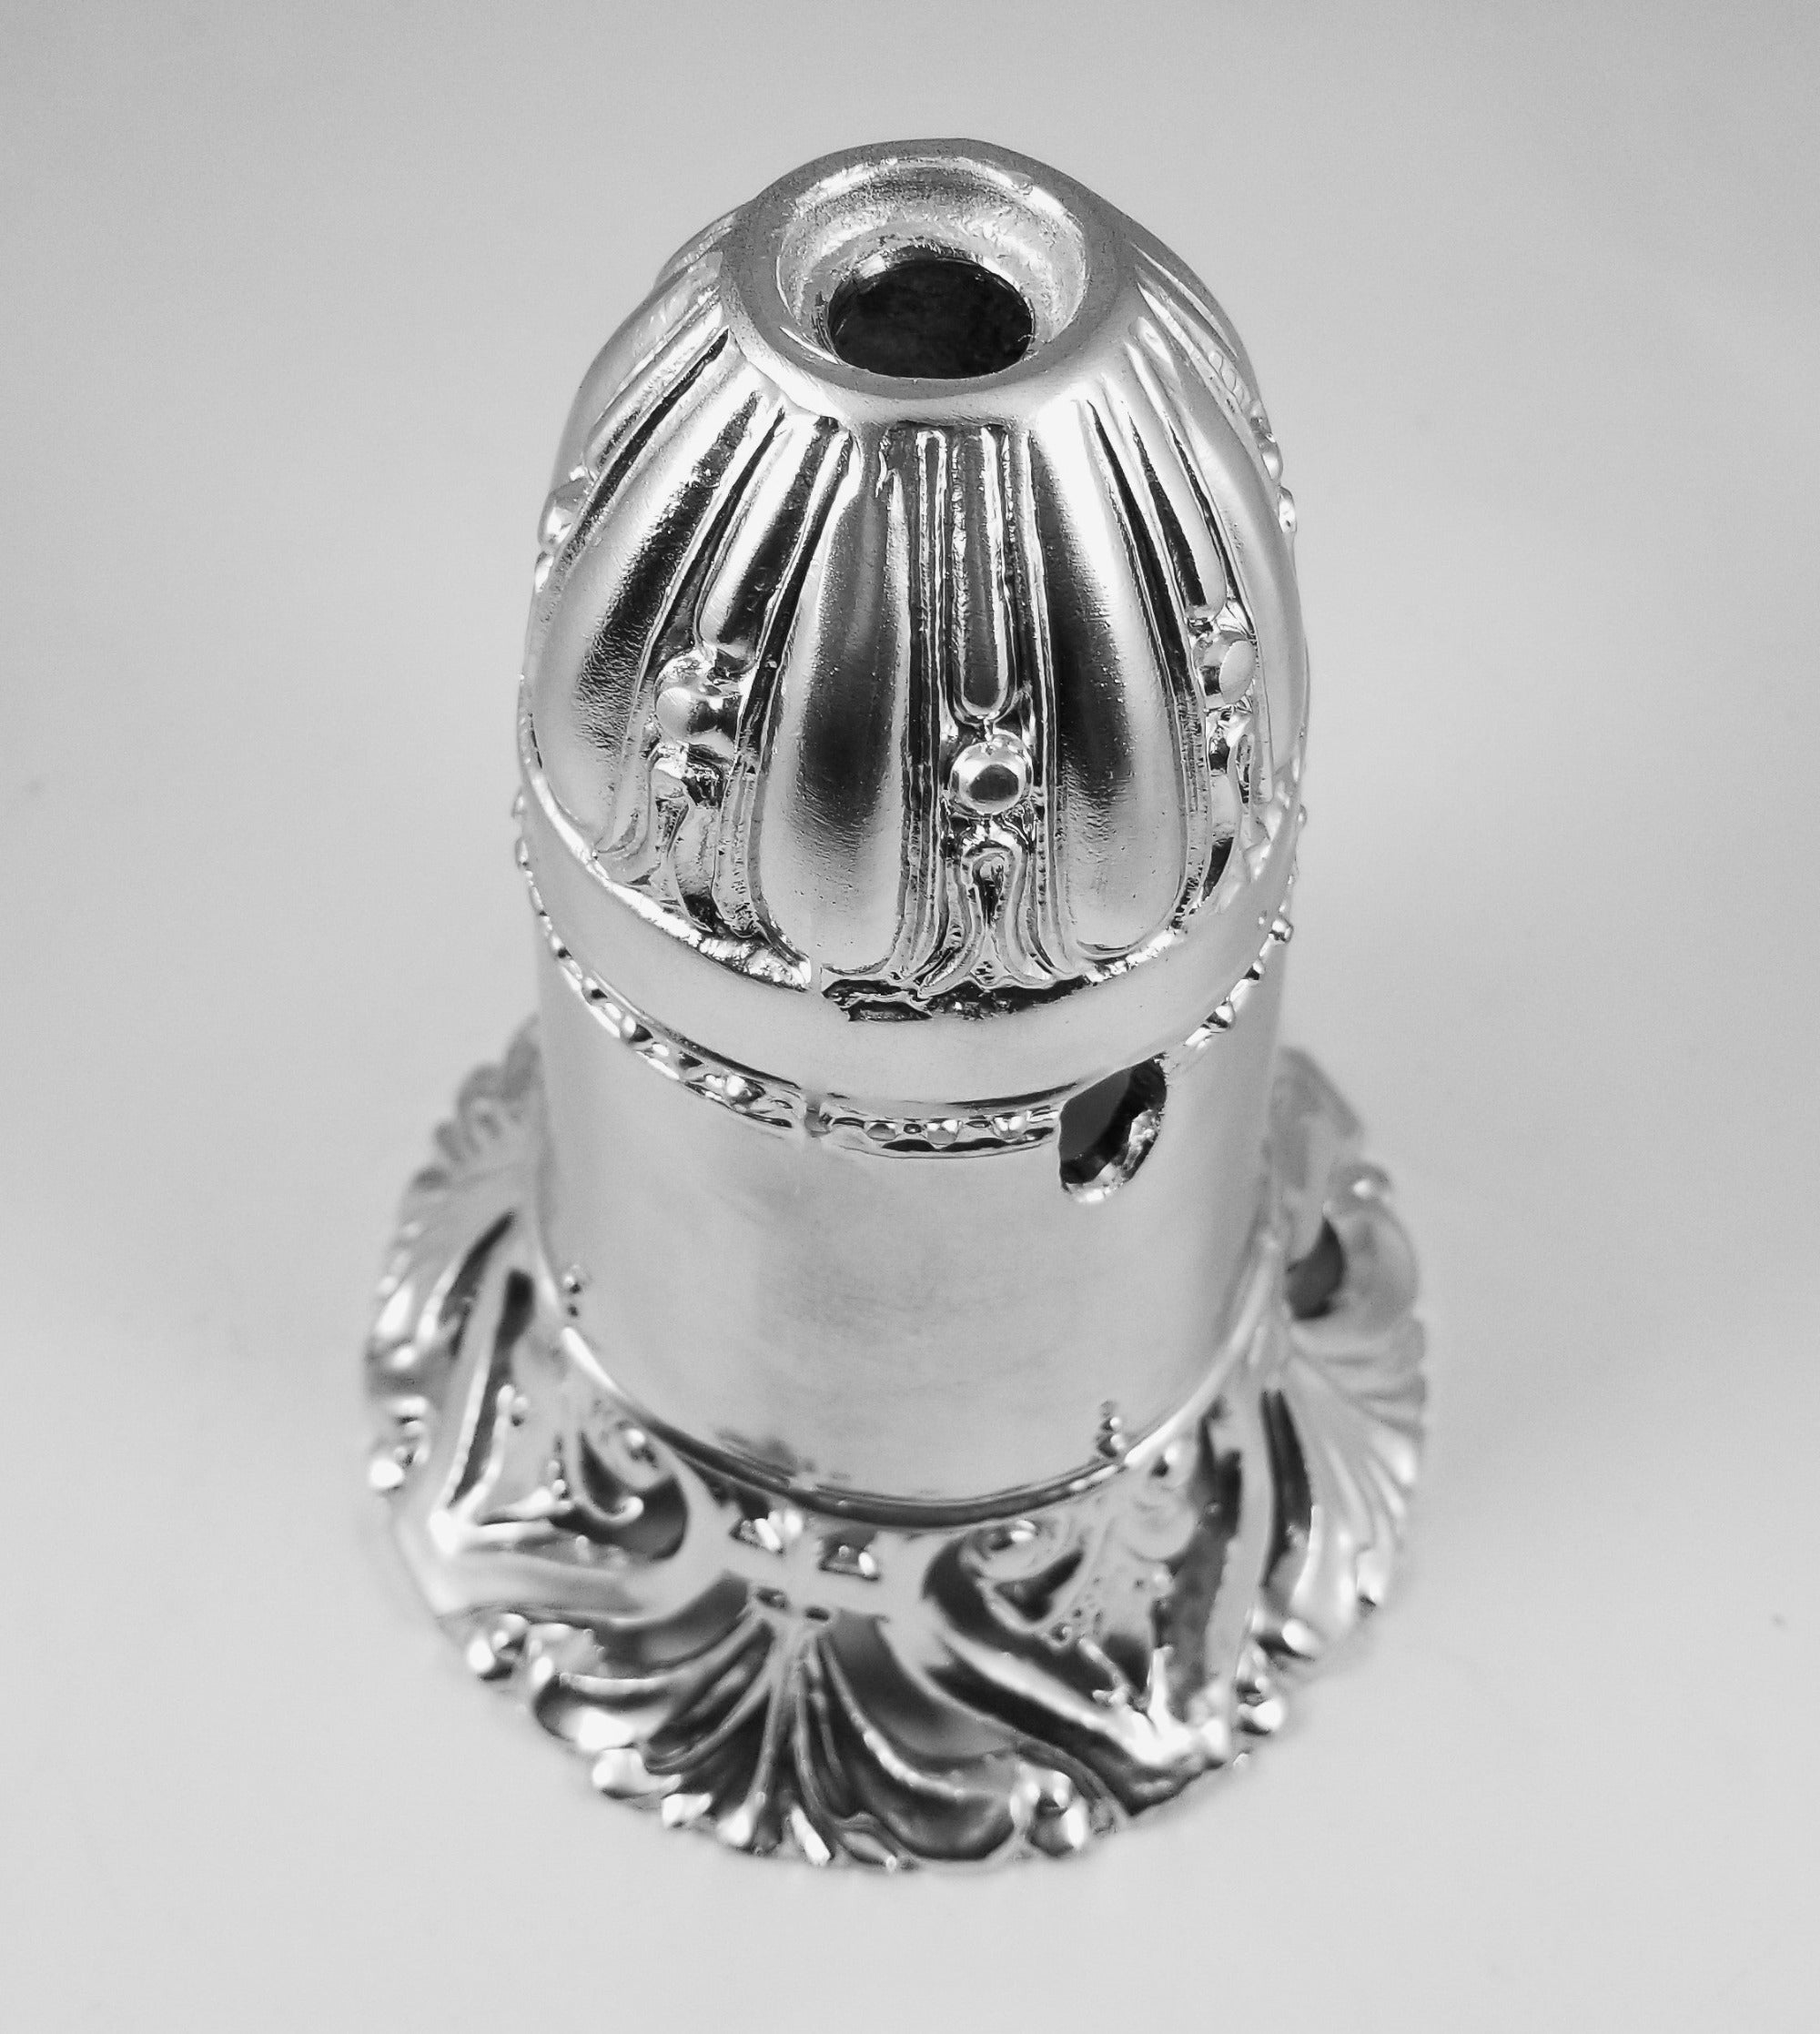 Decorative Torchiere Shade Holder - White Metal Material